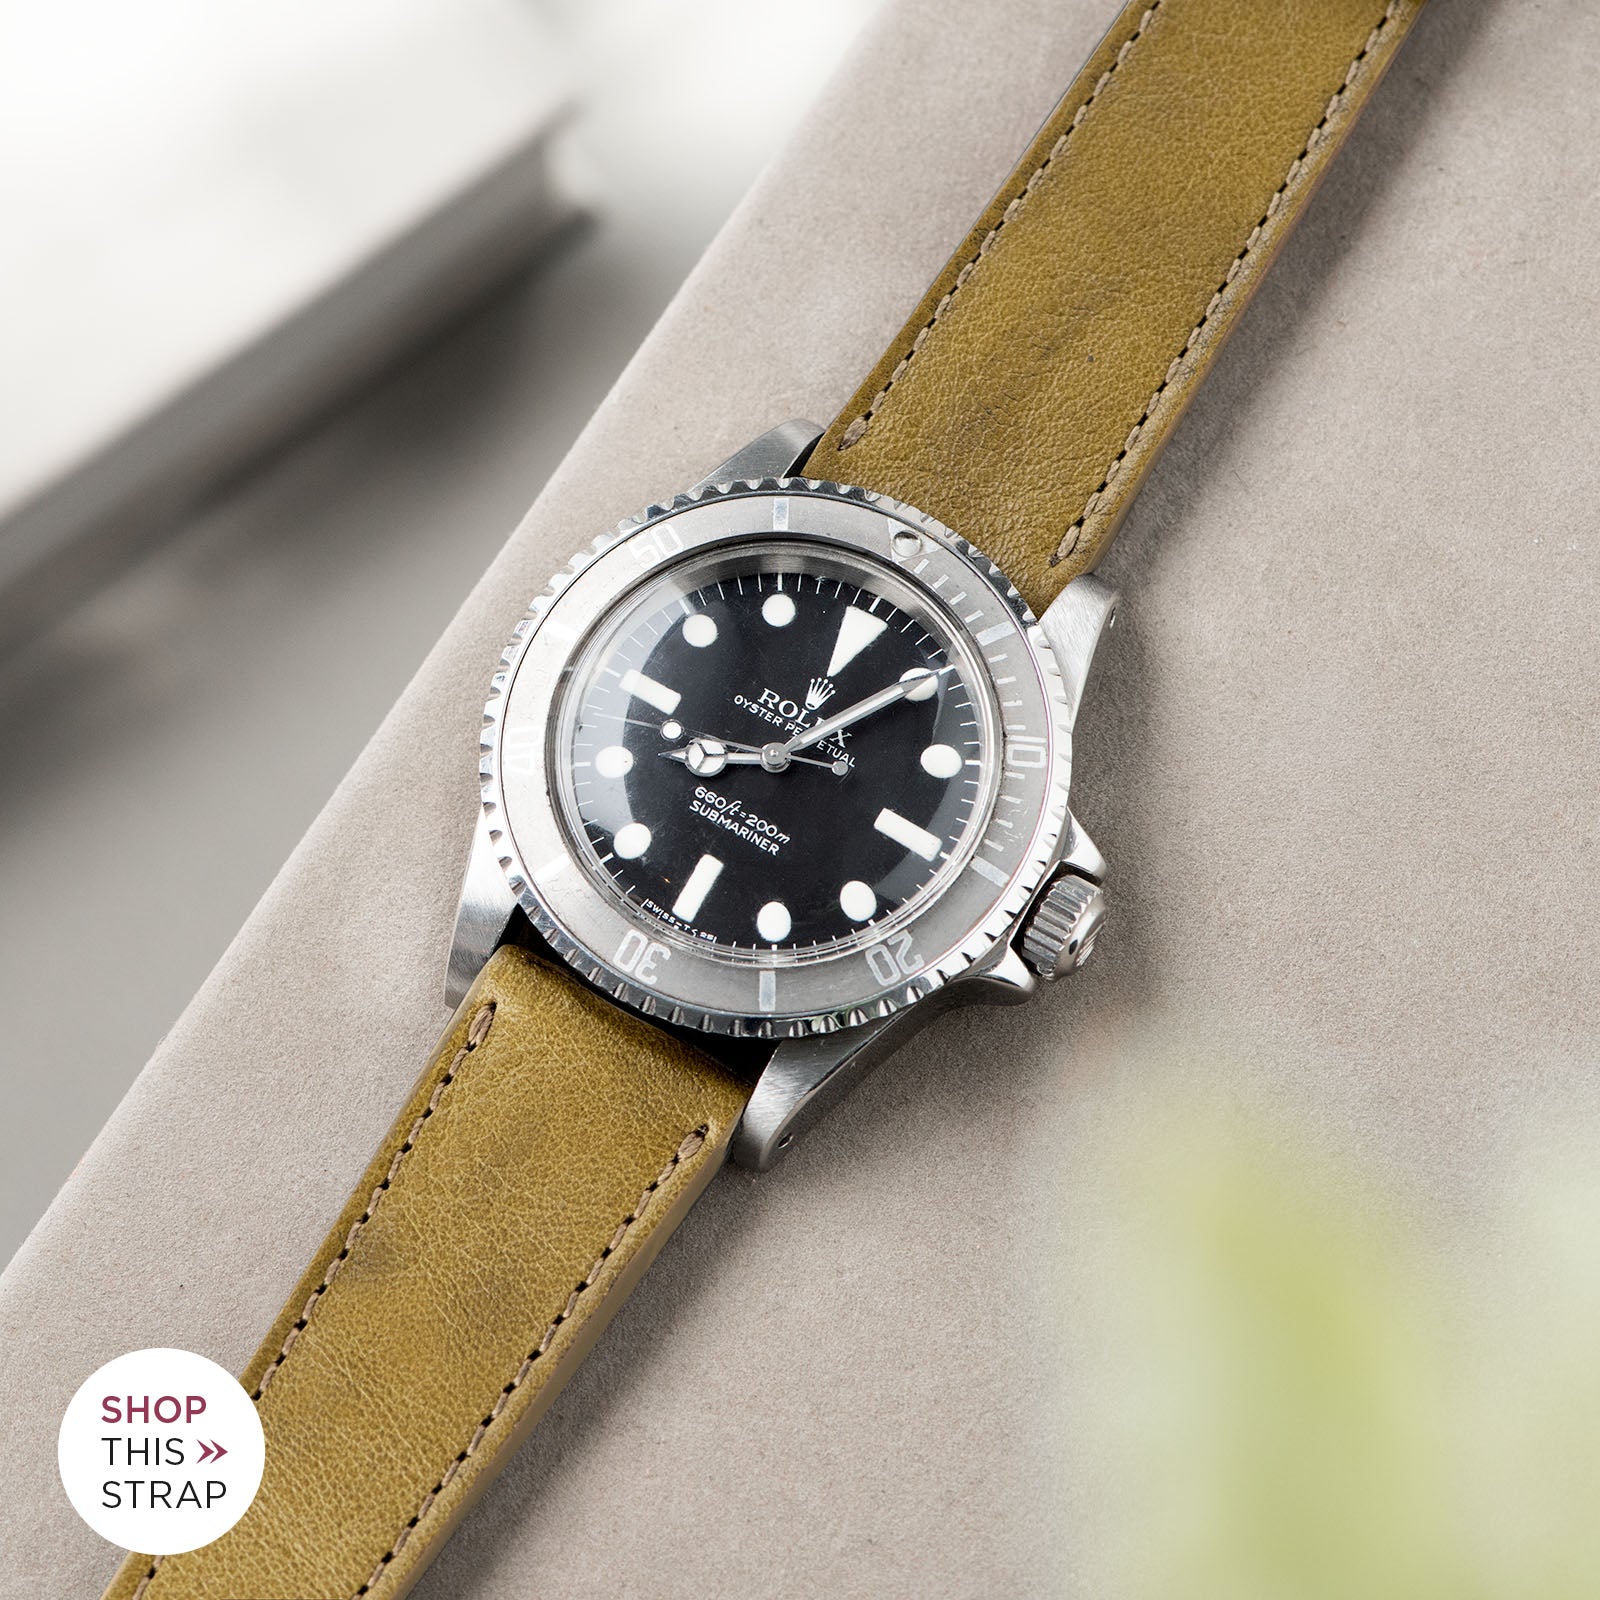 Bulang and Sons_Strap Guide_The Rolex 5513 Faded Maxi Submariner_Light Olive Green Leather Watch Strap